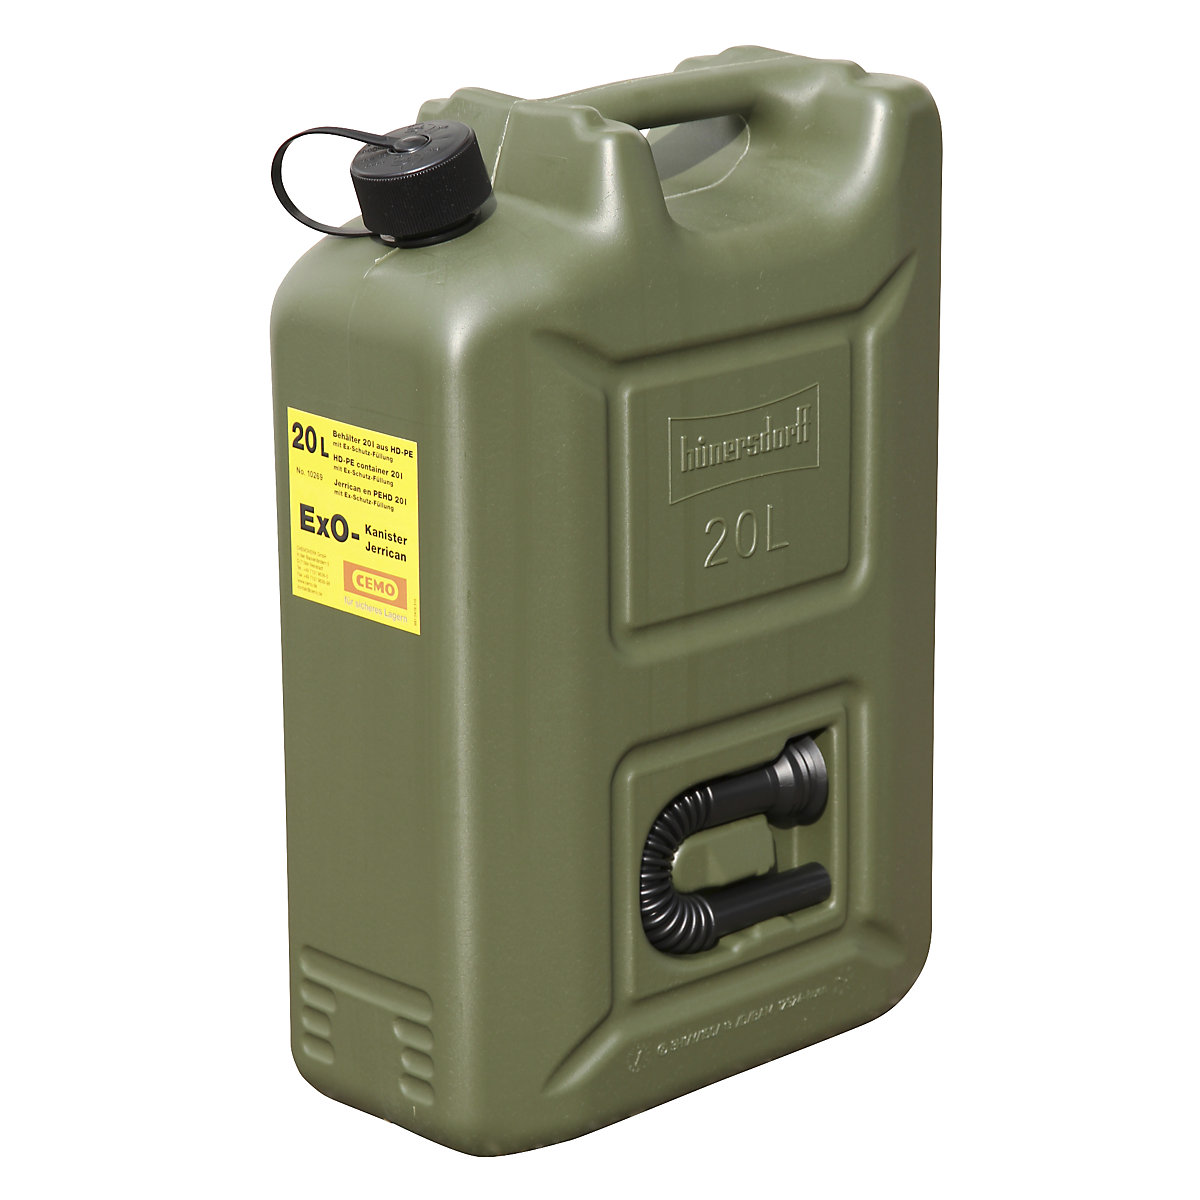 Ex0 canister – CEMO, non-explosive, with explosion protection filling, capacity 20 l-5